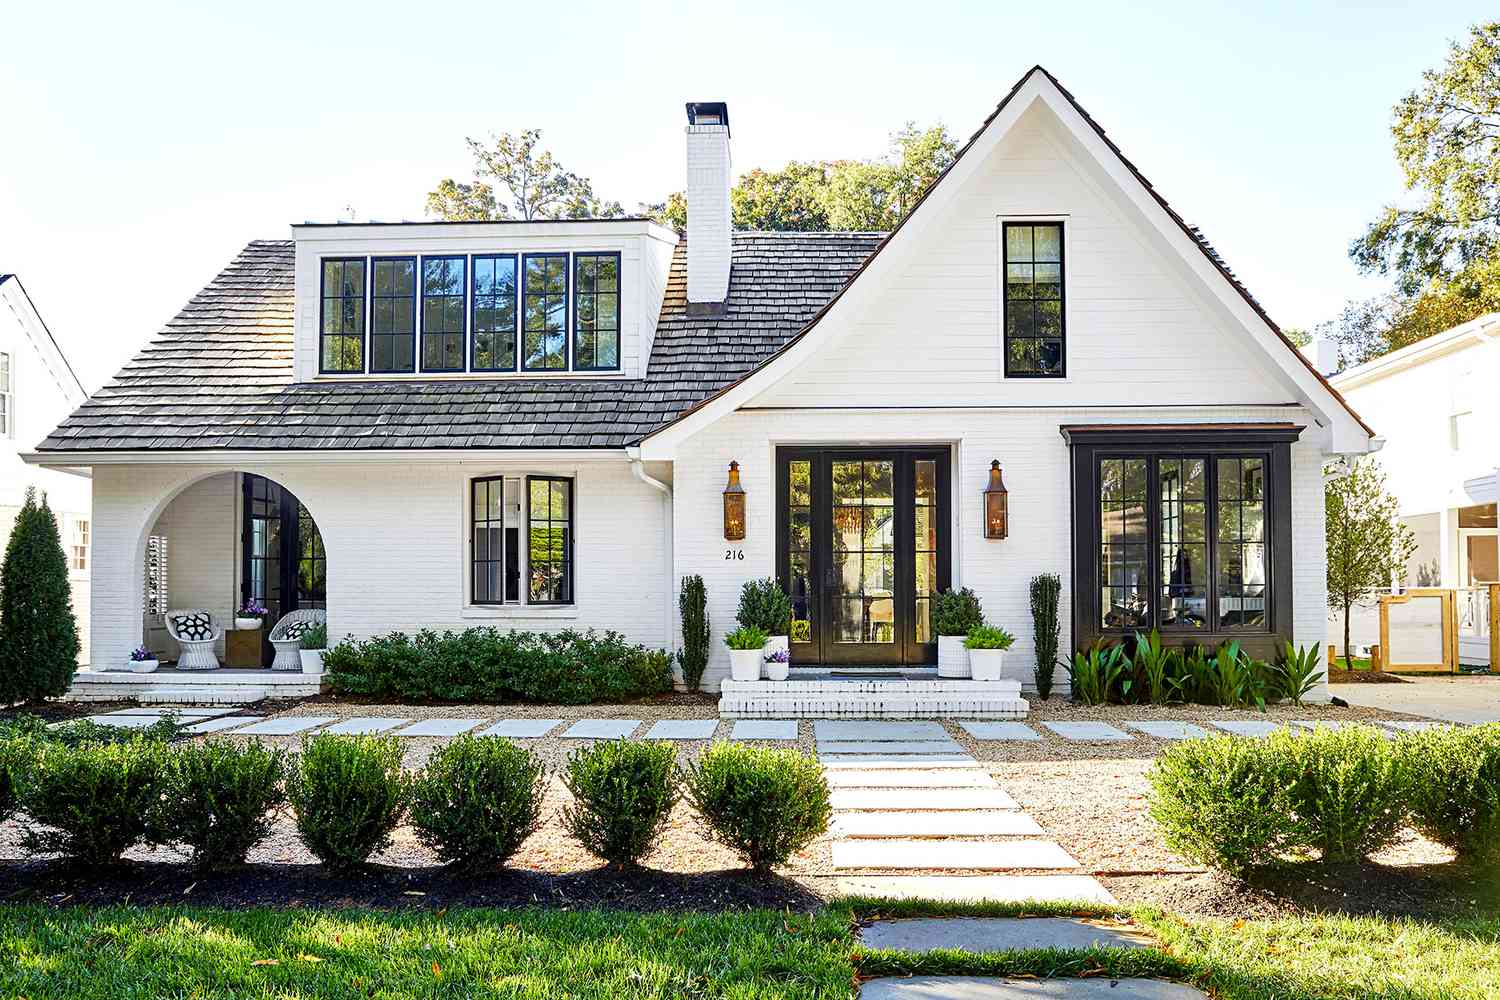 What to Anticipate - Transform Your Home’s Exterior